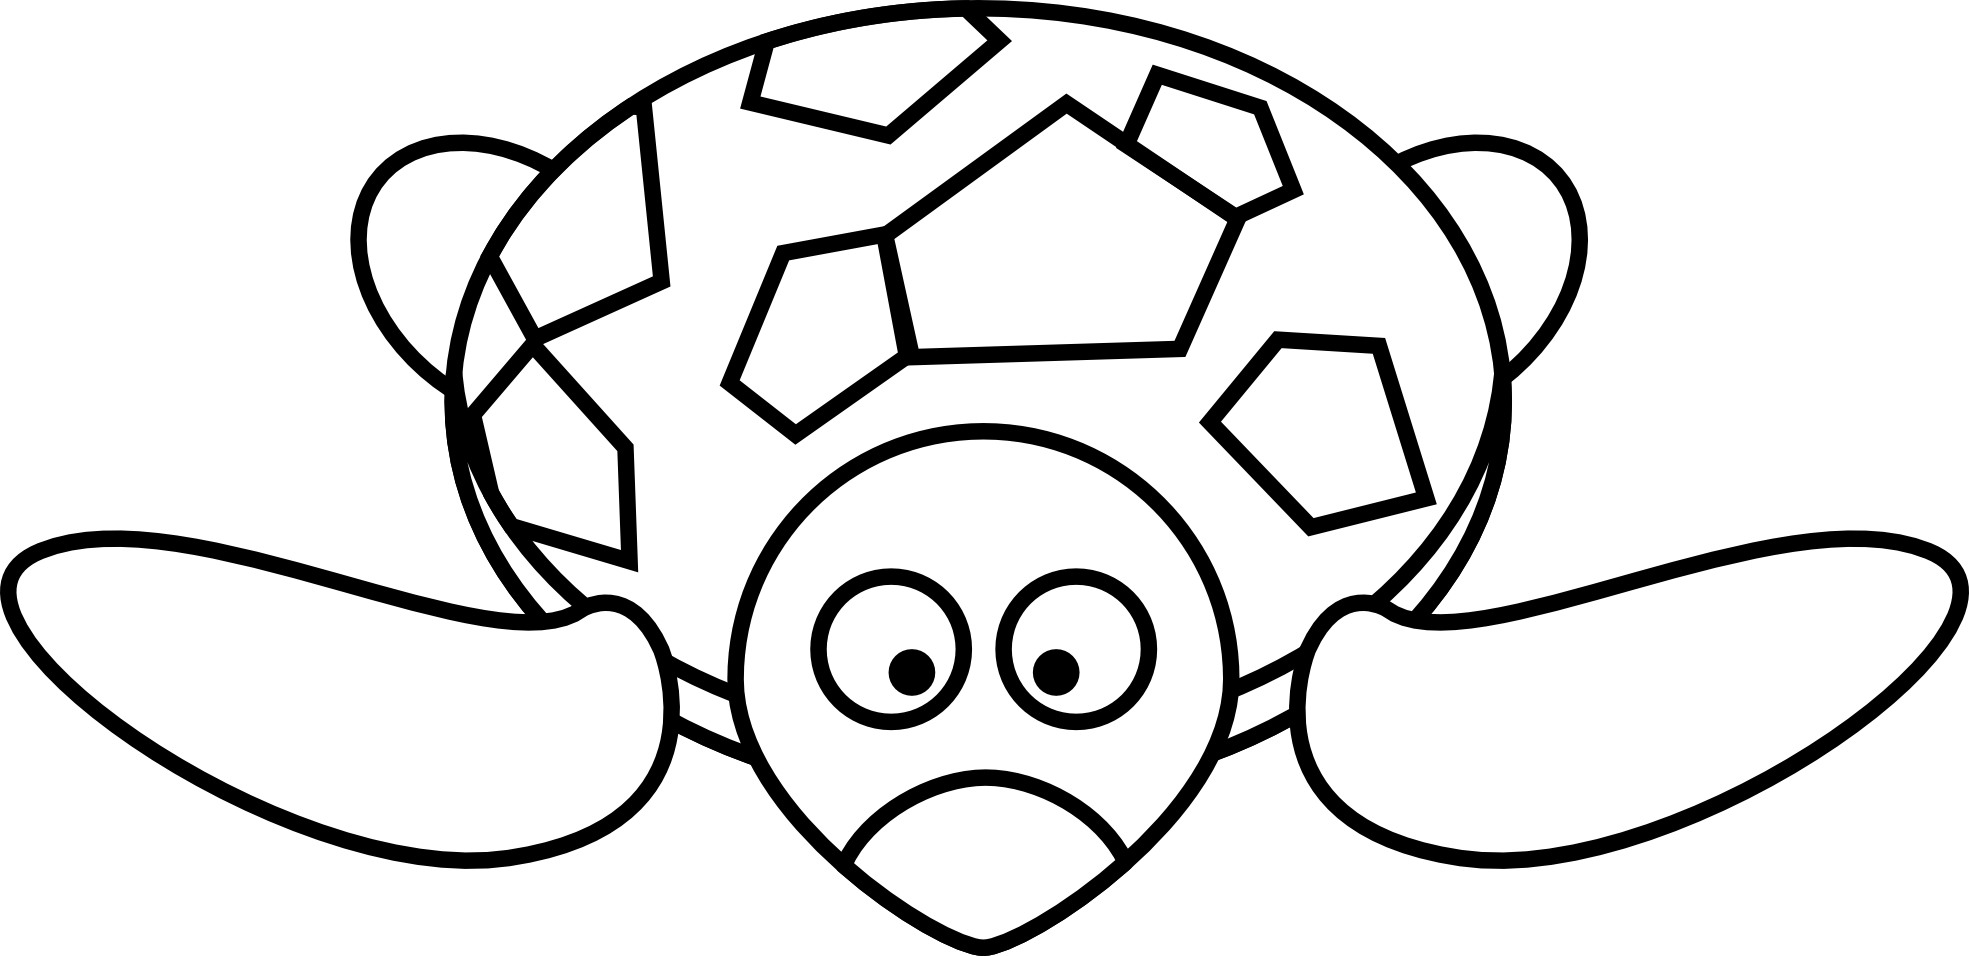 Cute Turtle Clipart Black And White   Clipart Panda   Free Clipart